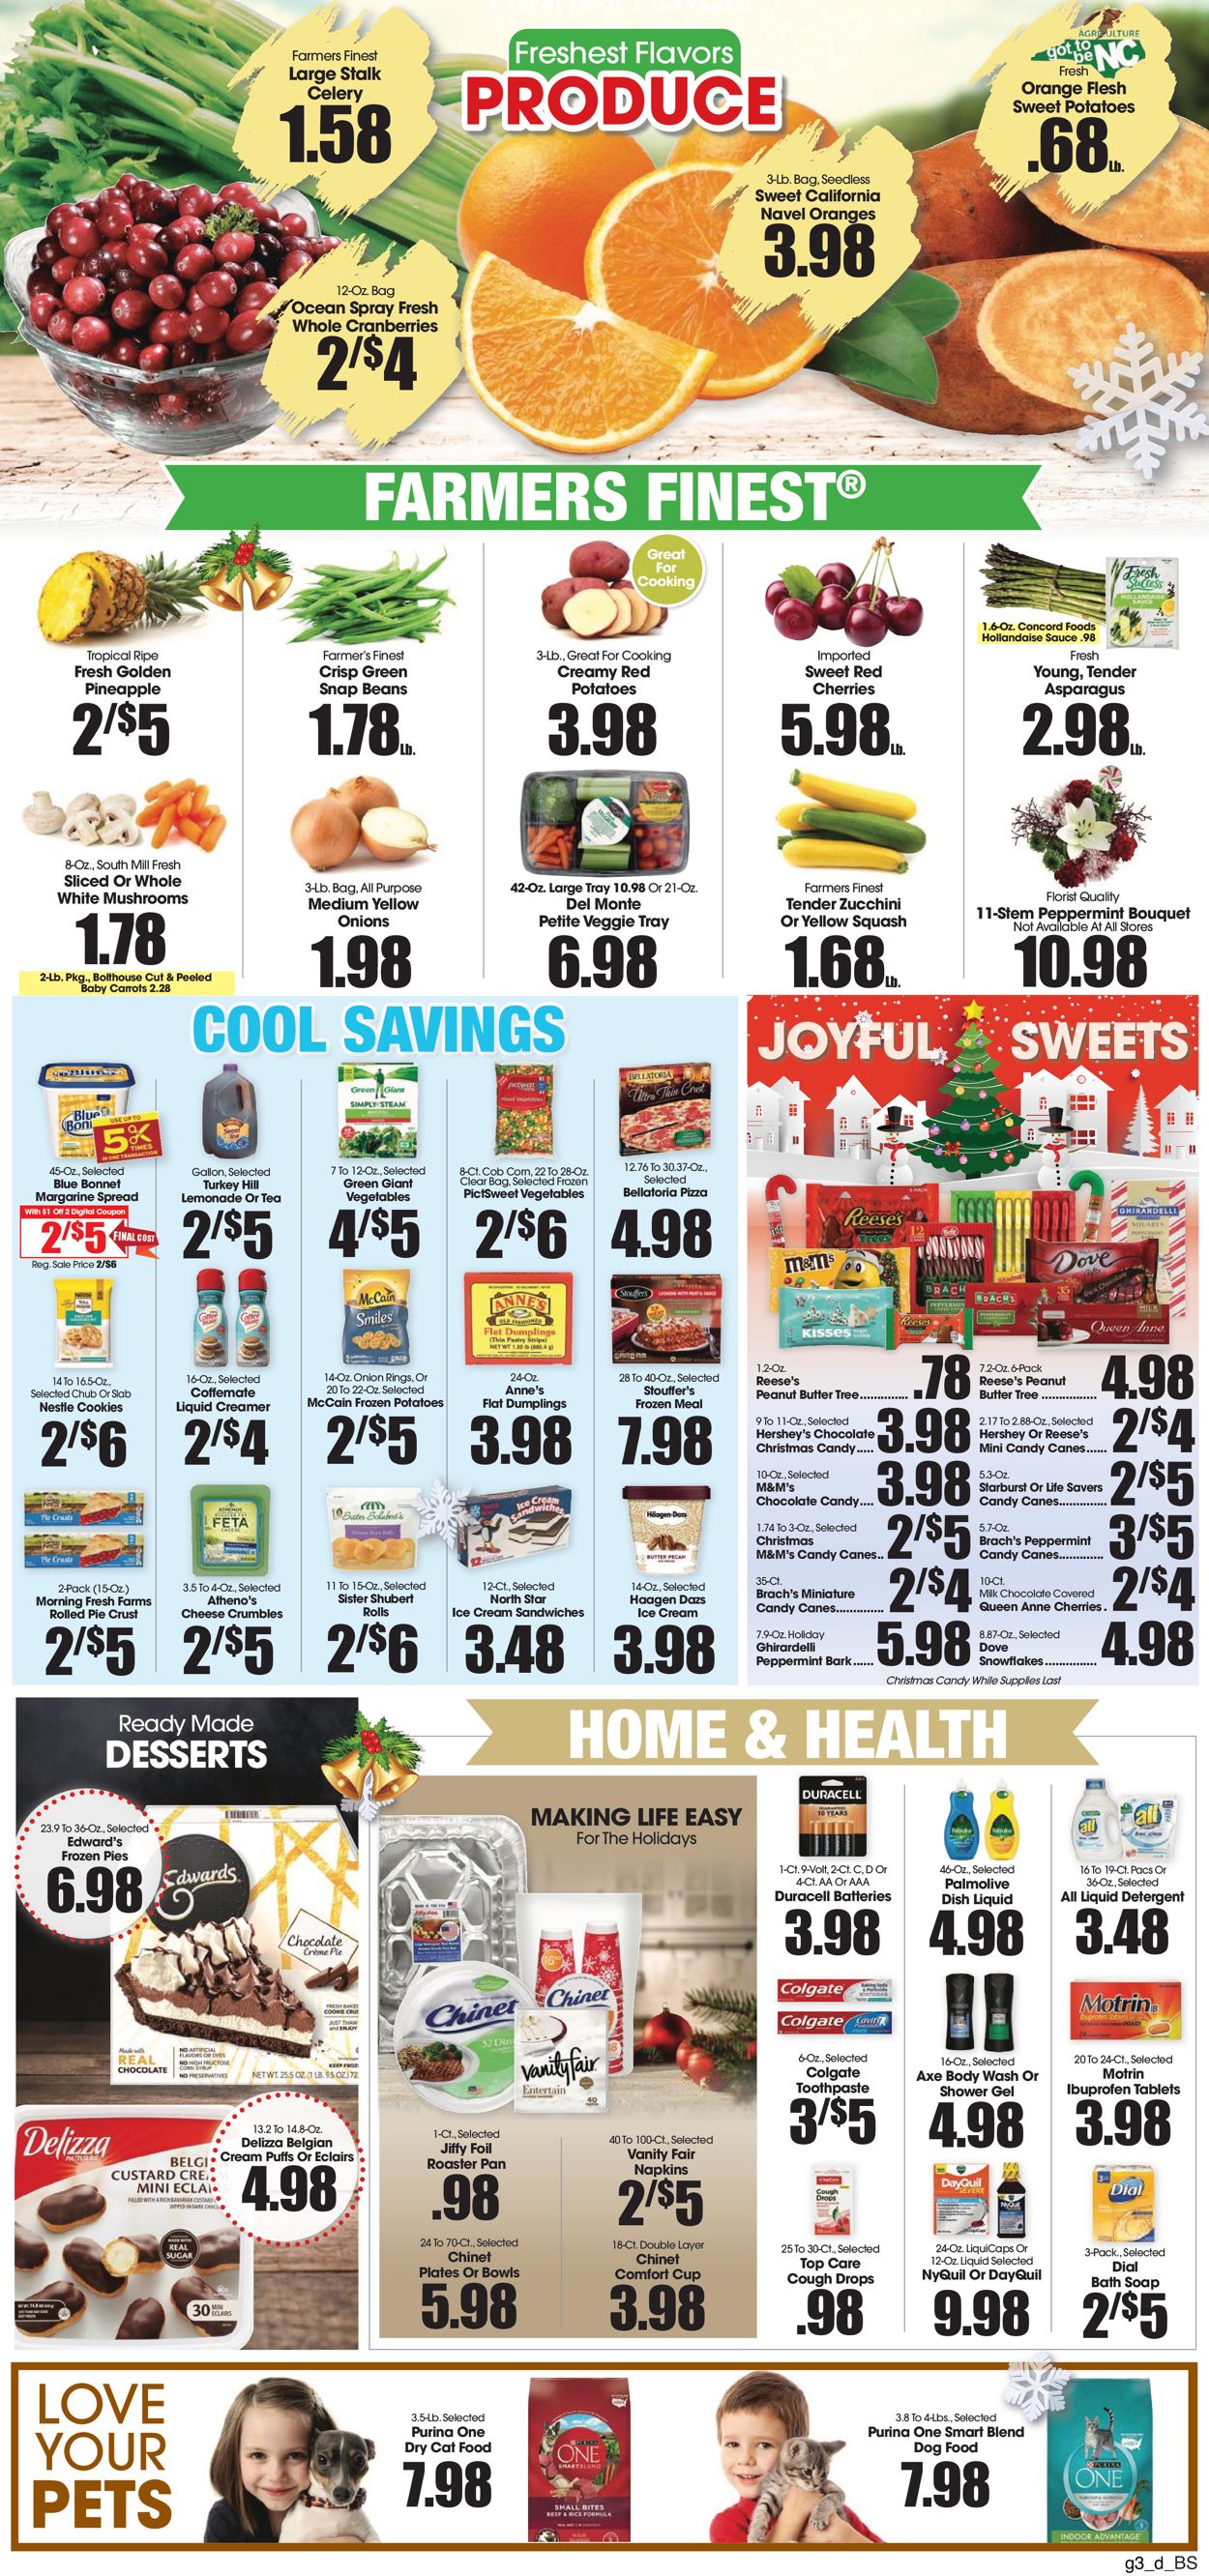 Catalogue Food King HOLIDAYS 2021 from 12/15/2021